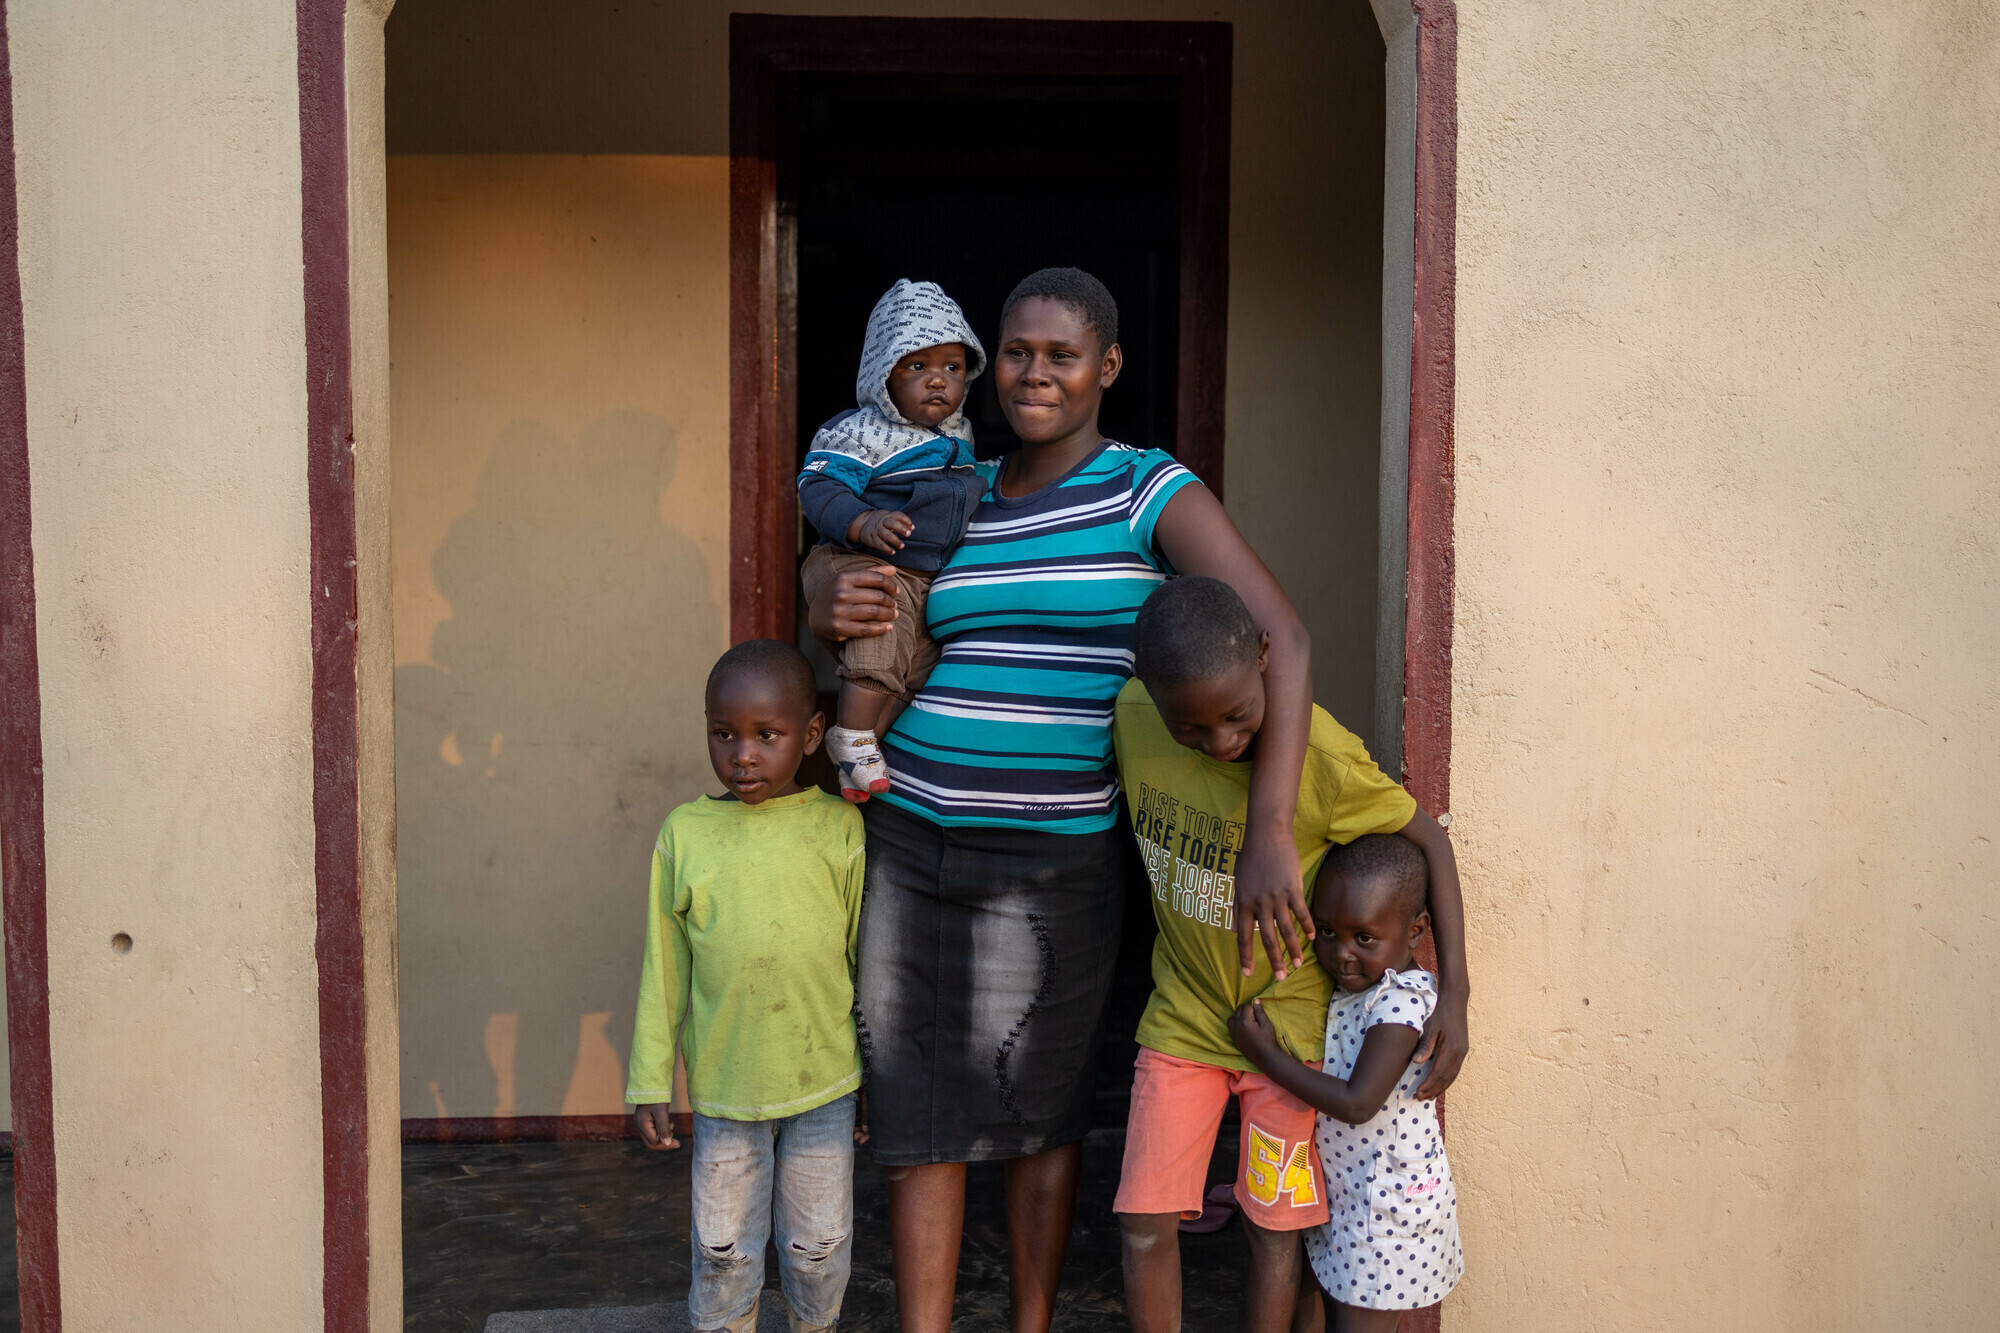 To support women, including Juliana Hahlani, whose husband works in South Africa, Score Against Povery helped her to install a new solar power system. She can use it for protection, education and income for her family.MCC photo/Meghan Mast